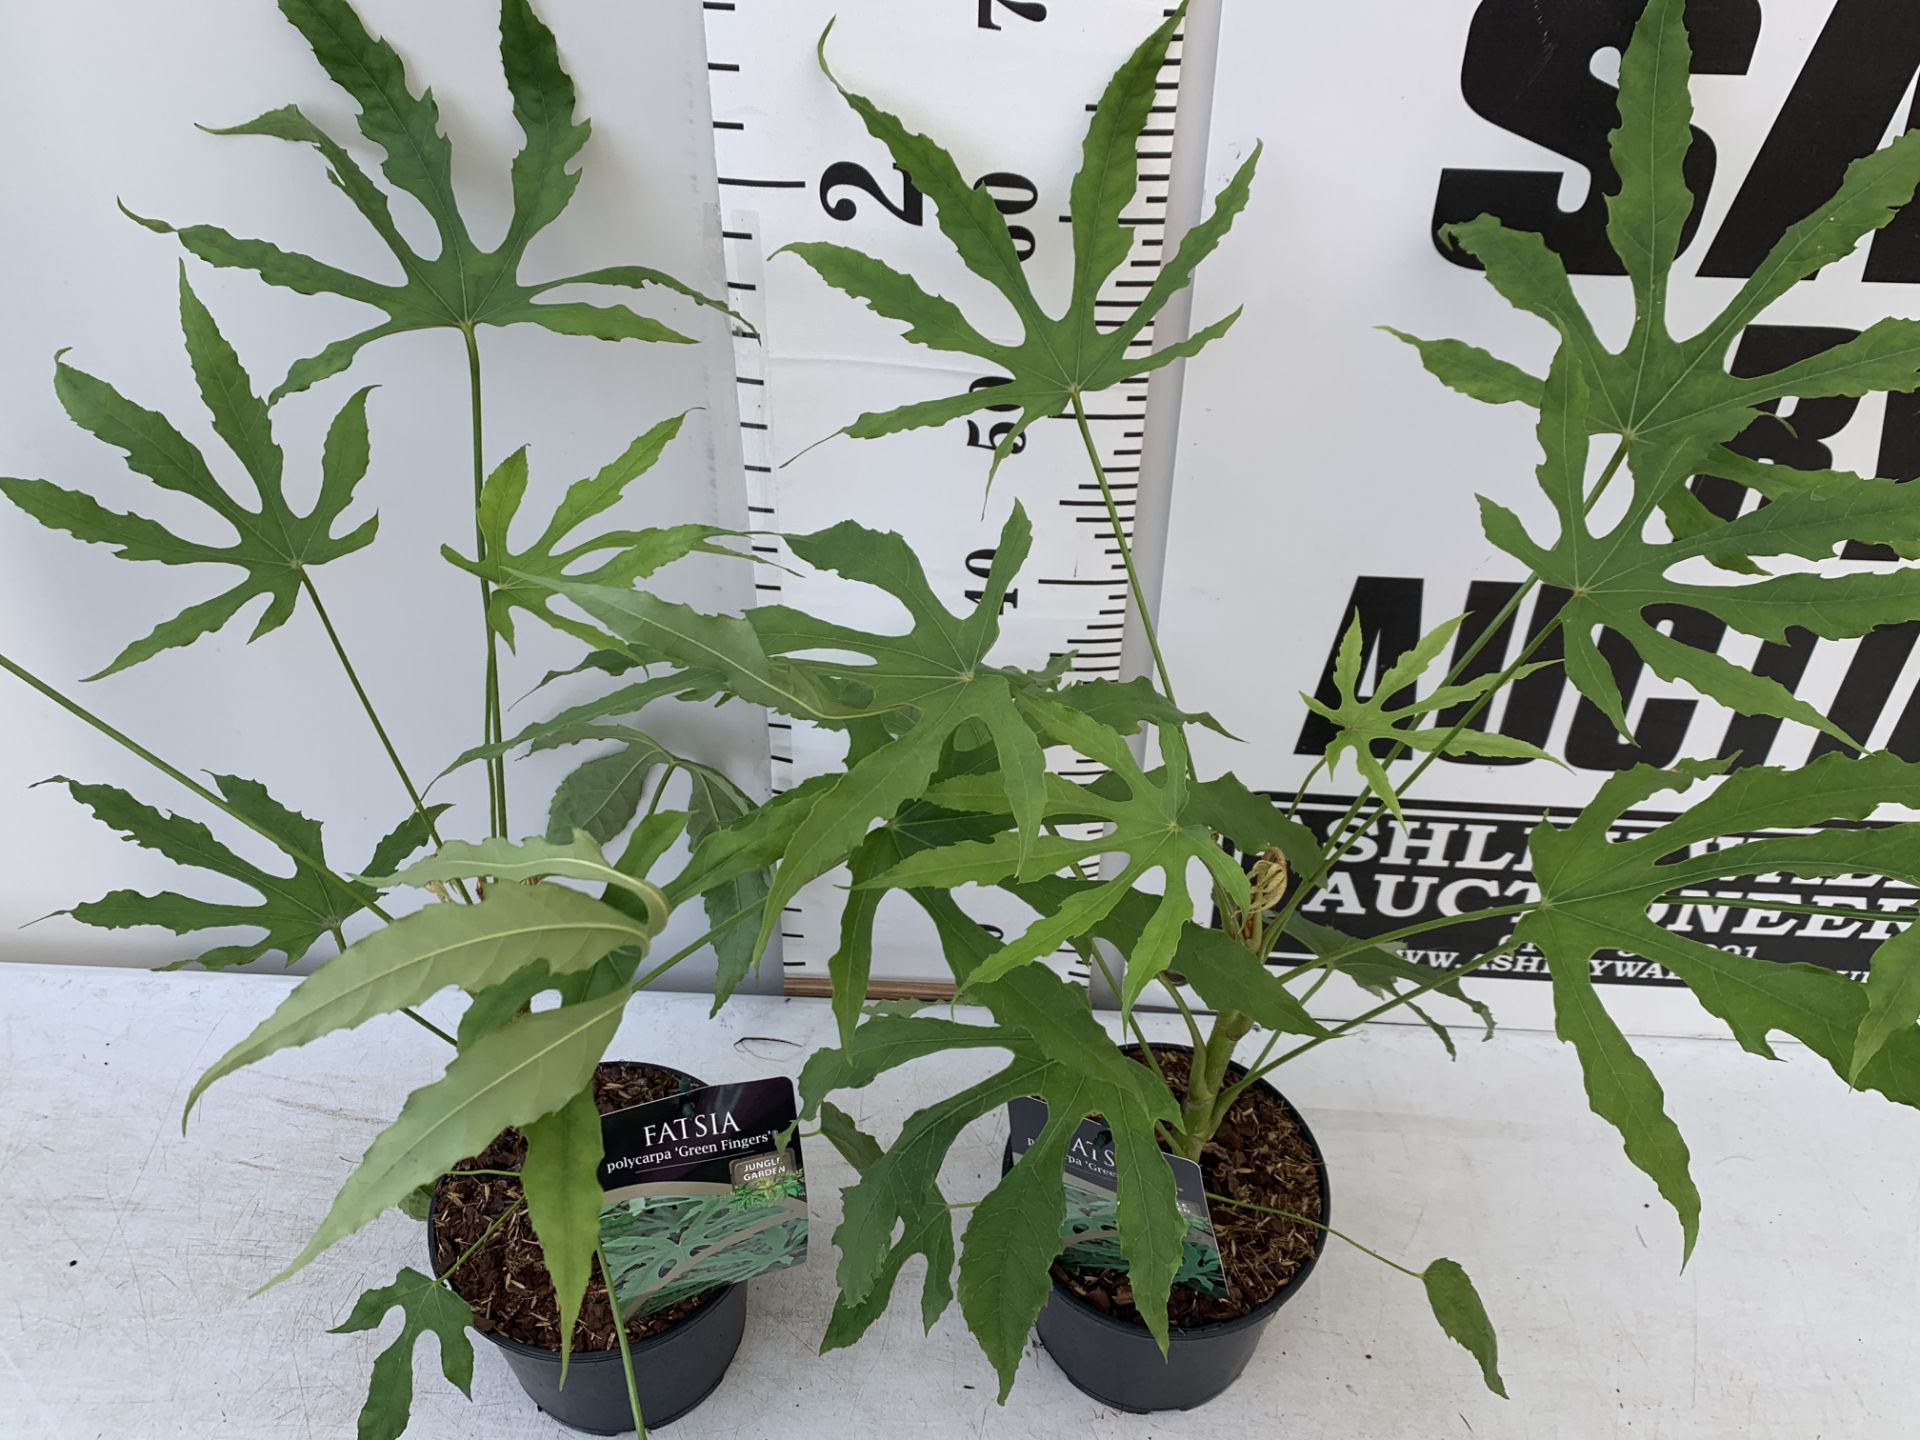 TWO FATSIA JUNGLE GARDEN POLYCARPA GREEN FINGERS IN 2 LTR POTS 70CM TALL PLUS VAT TO BE SOLD FOR THE - Image 3 of 8